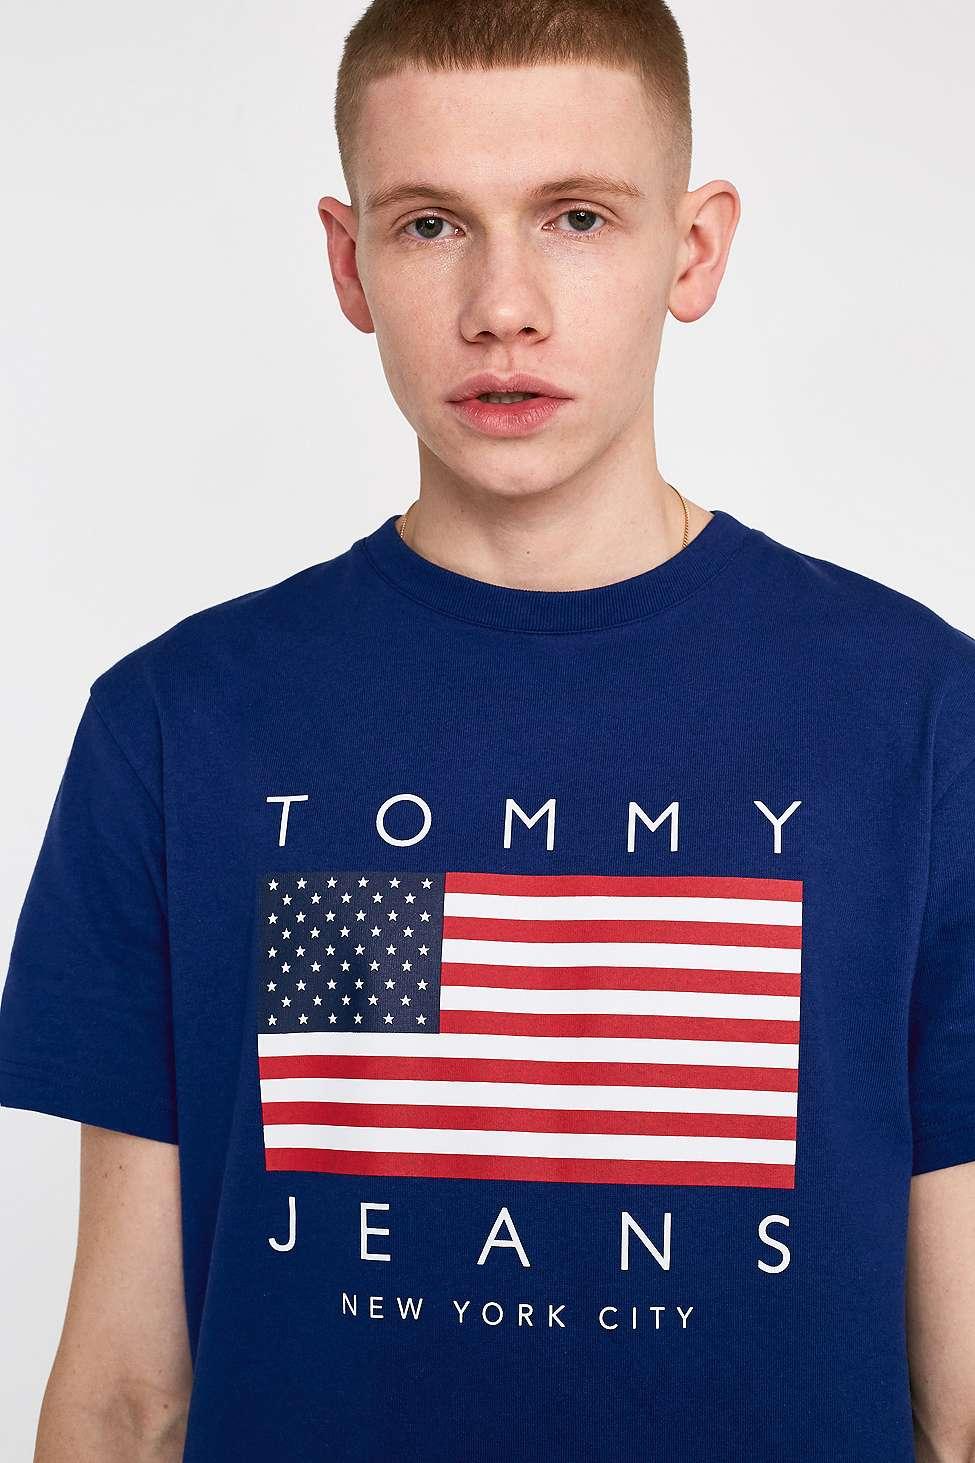 Tommy hilfiger usa. Tommy Jeans USA. Tommy Hilfiger t Shirt with American Flag. Томми американский сайт.